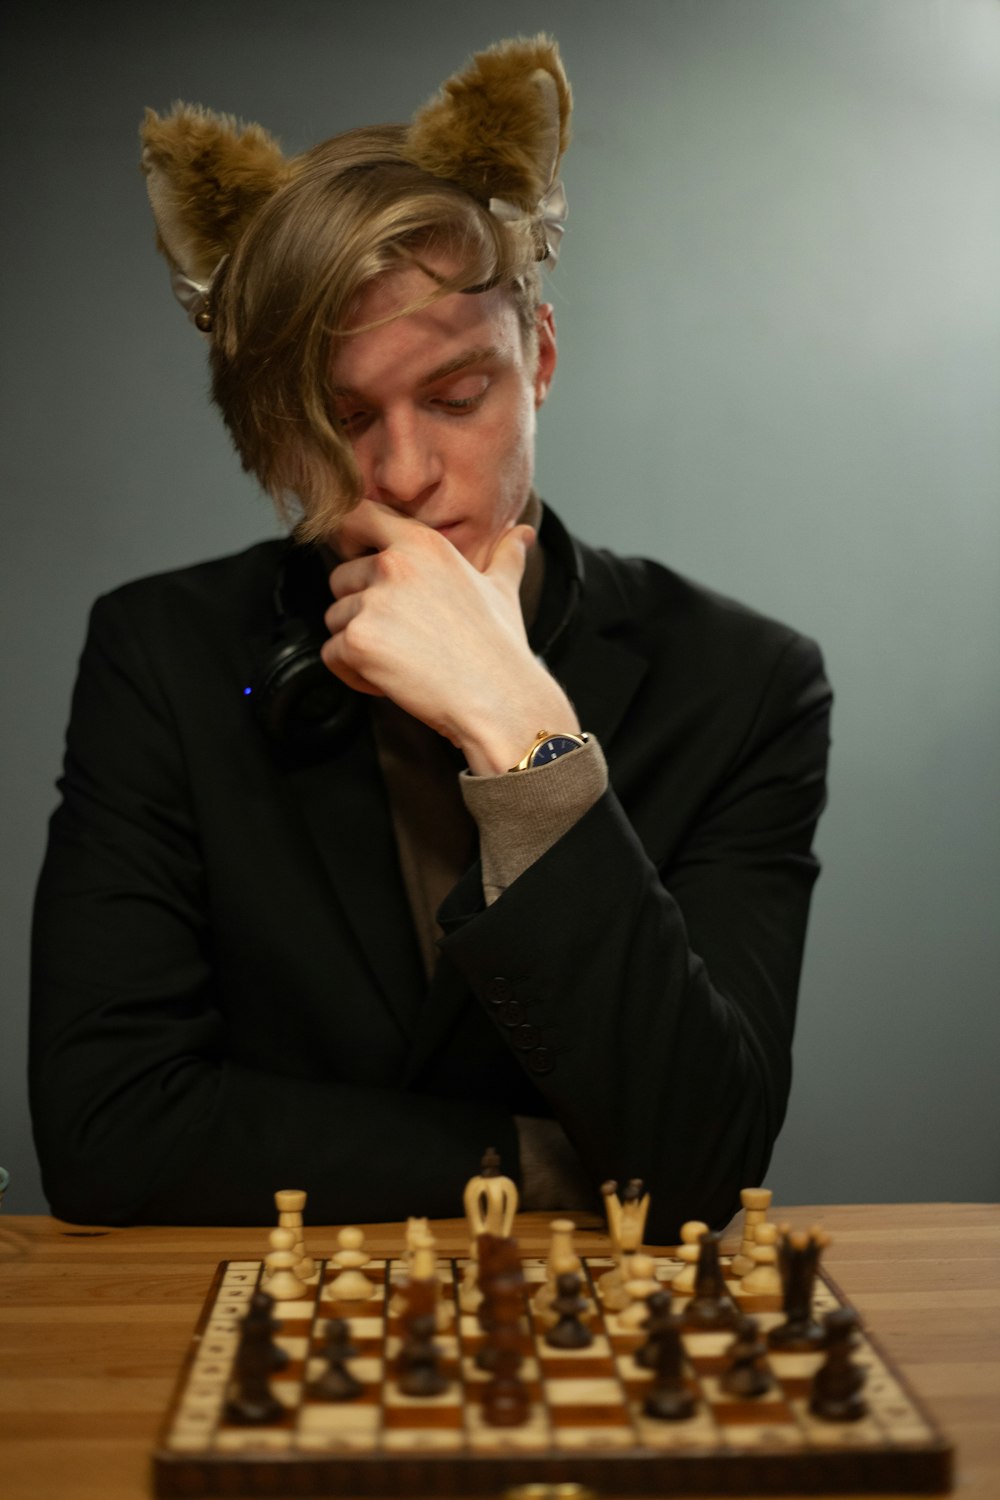 a man sitting at a table in front of a chess board